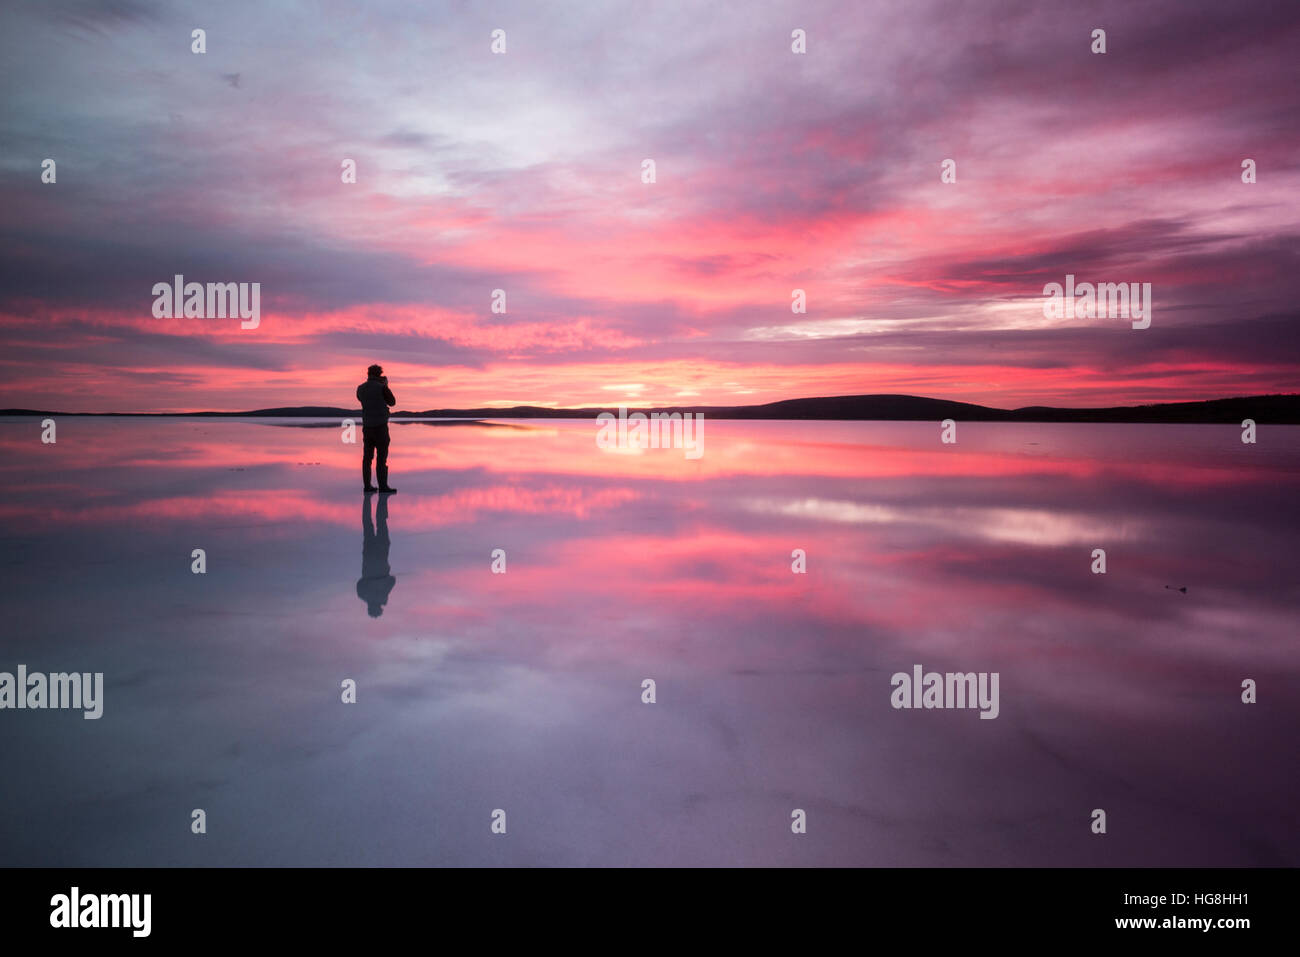 A person stands on a mirror reflected lake watching the sunset Stock Photo